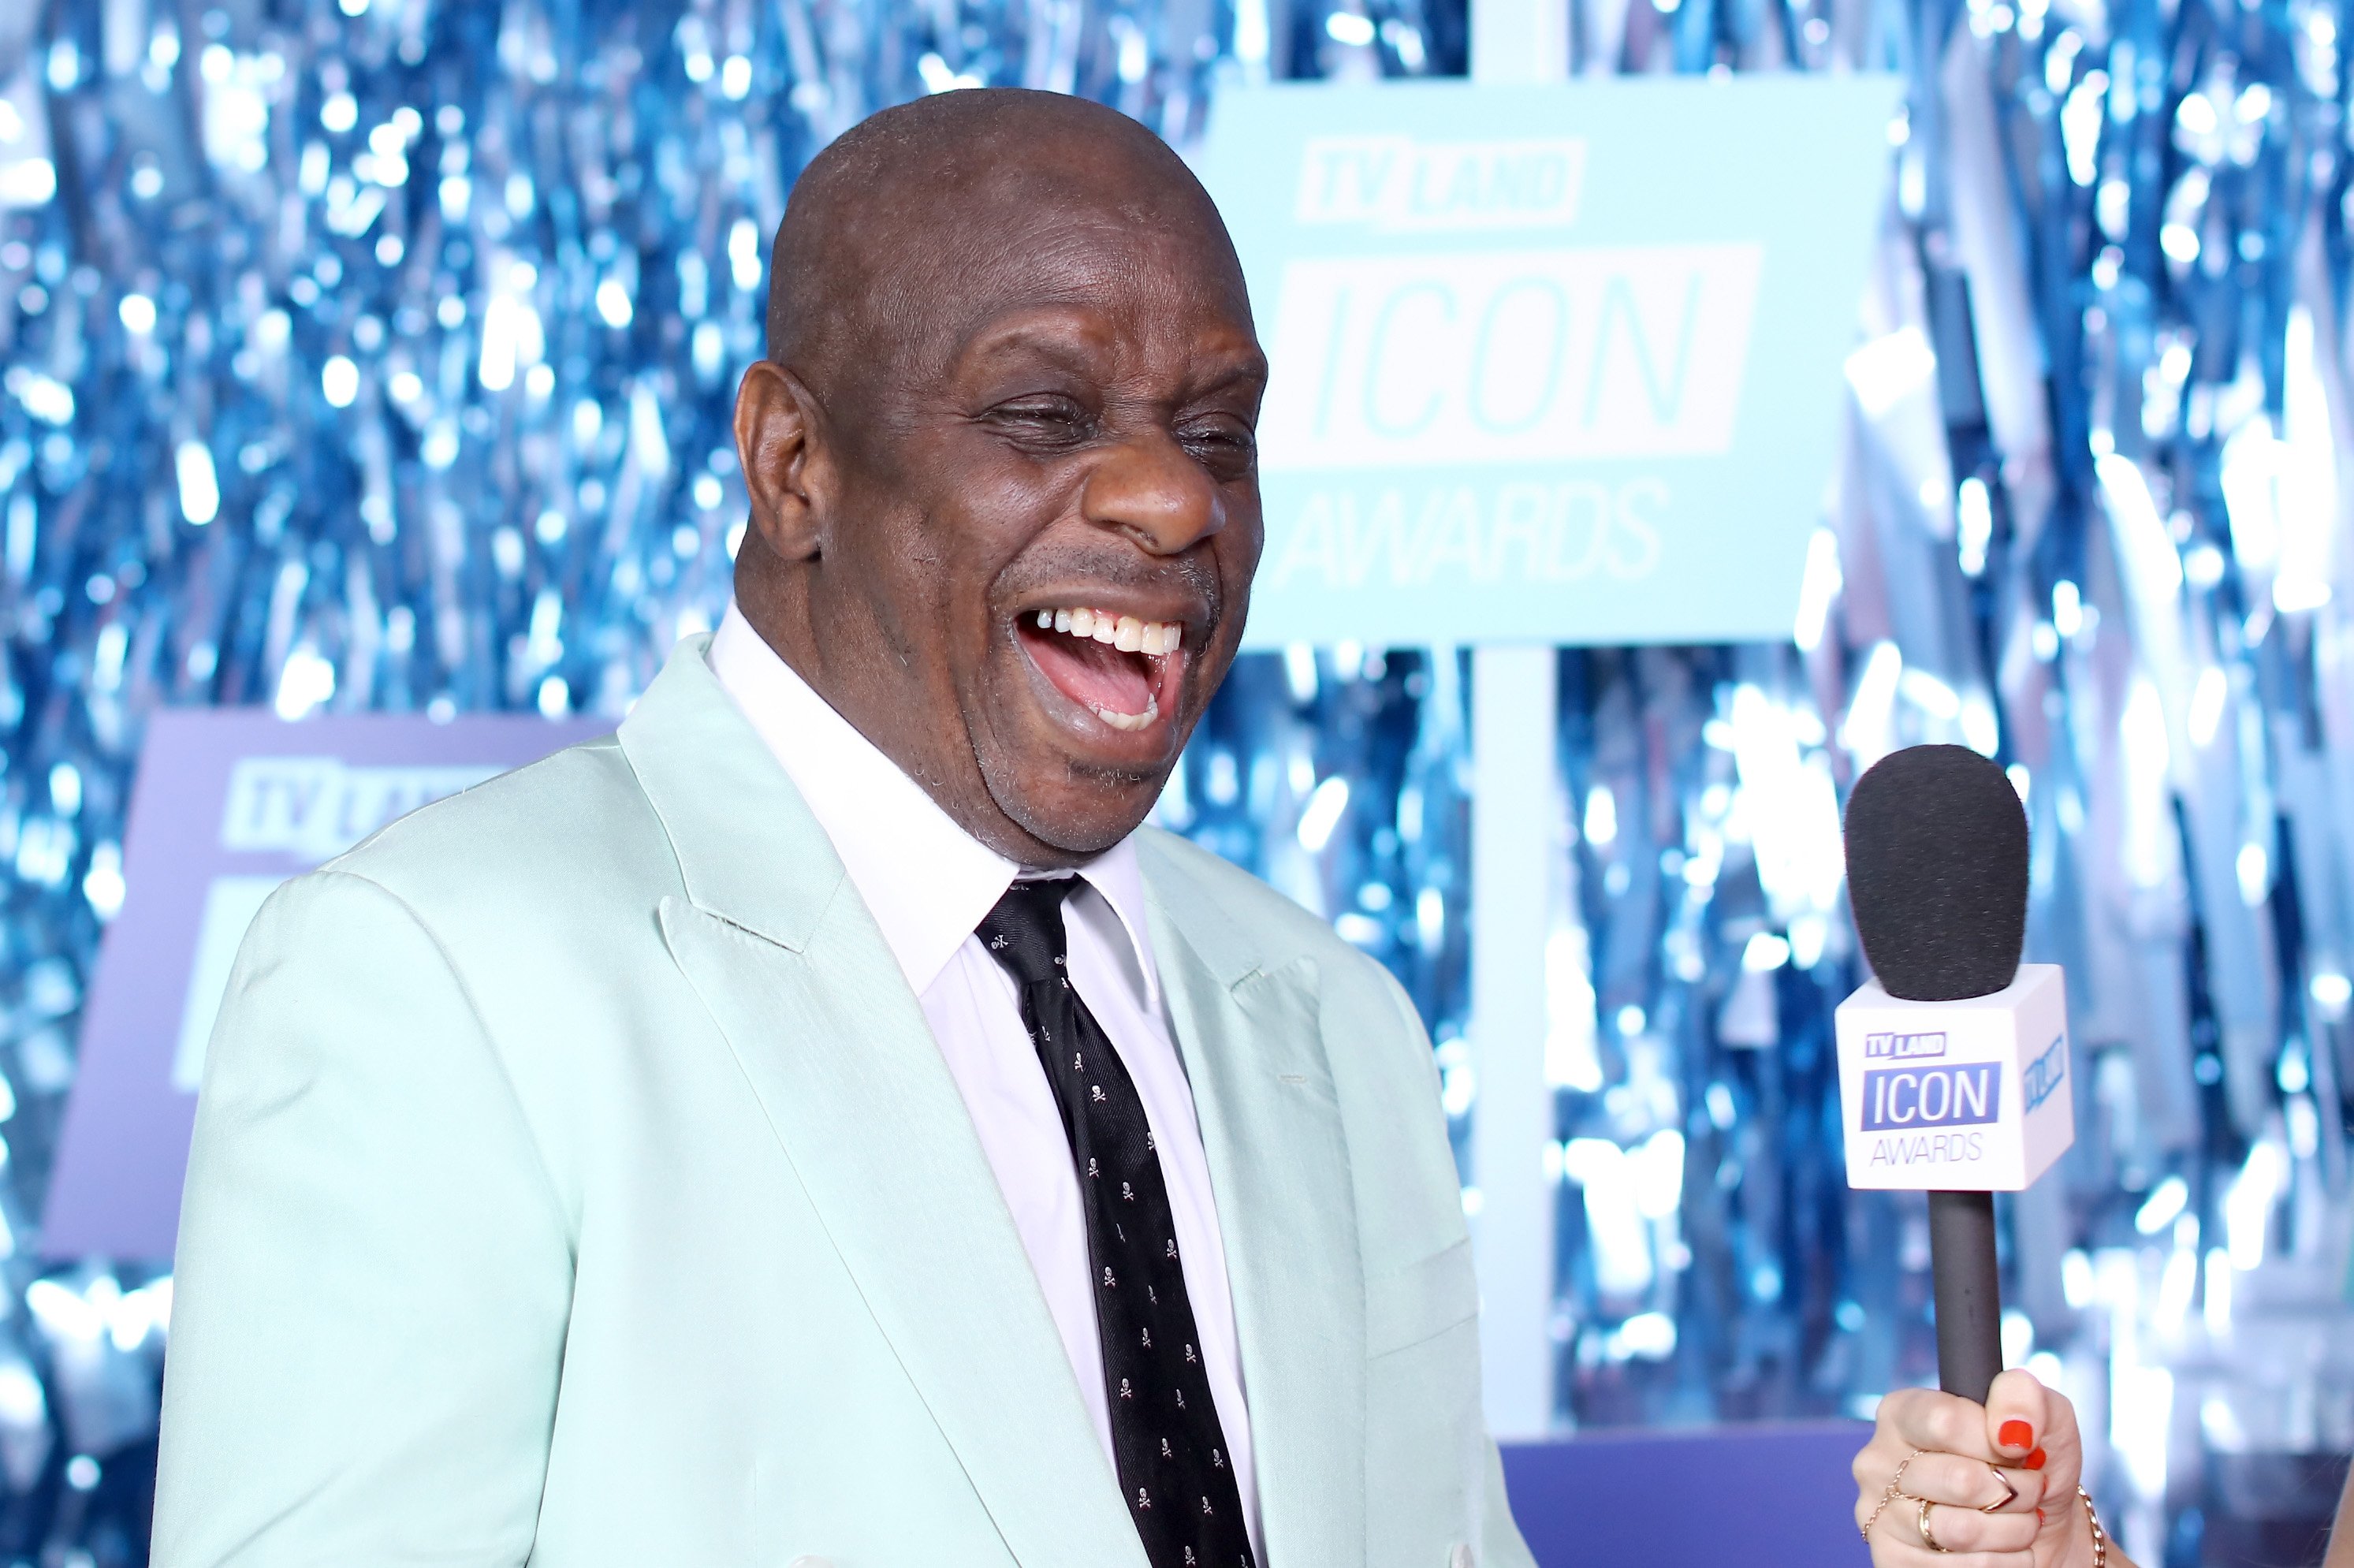 Jimmie Walker during the 2016 TV Land Icon Awards at The Barker Hanger on April 10, 2016 in Santa Monica, California. | Source: Getty Images